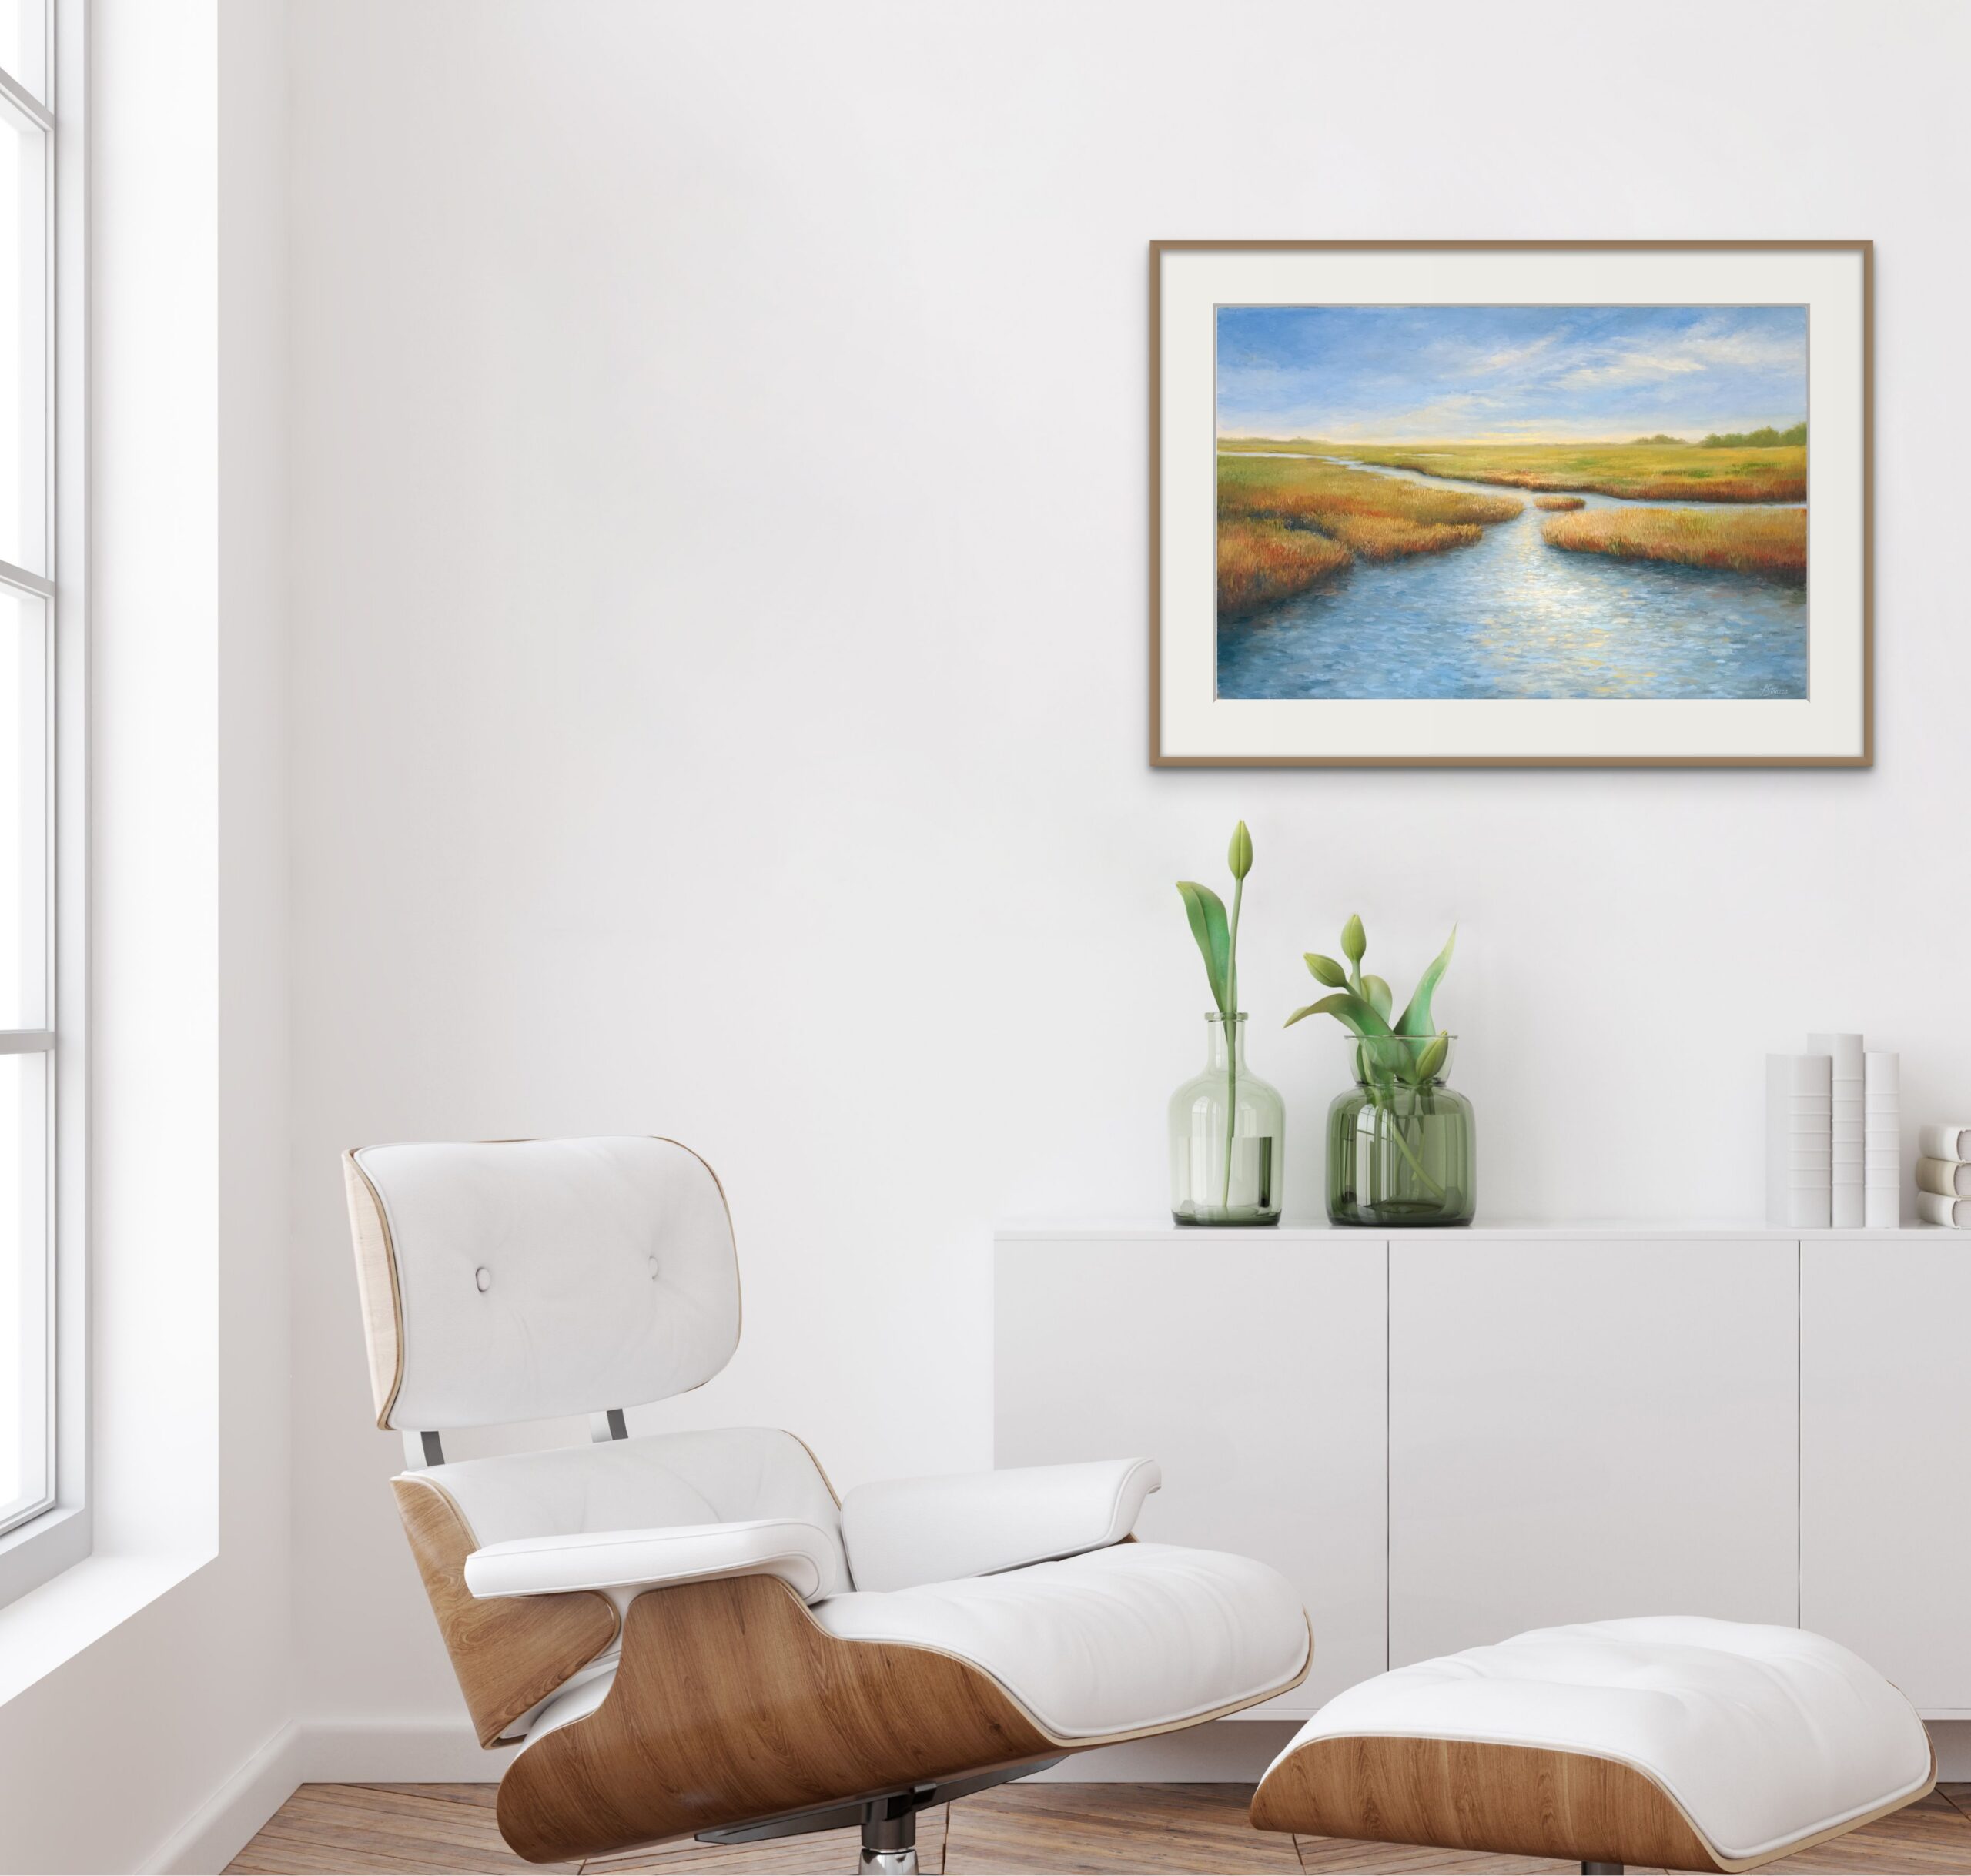 A New Day - Marsh painting and prints by Lisa Strazza